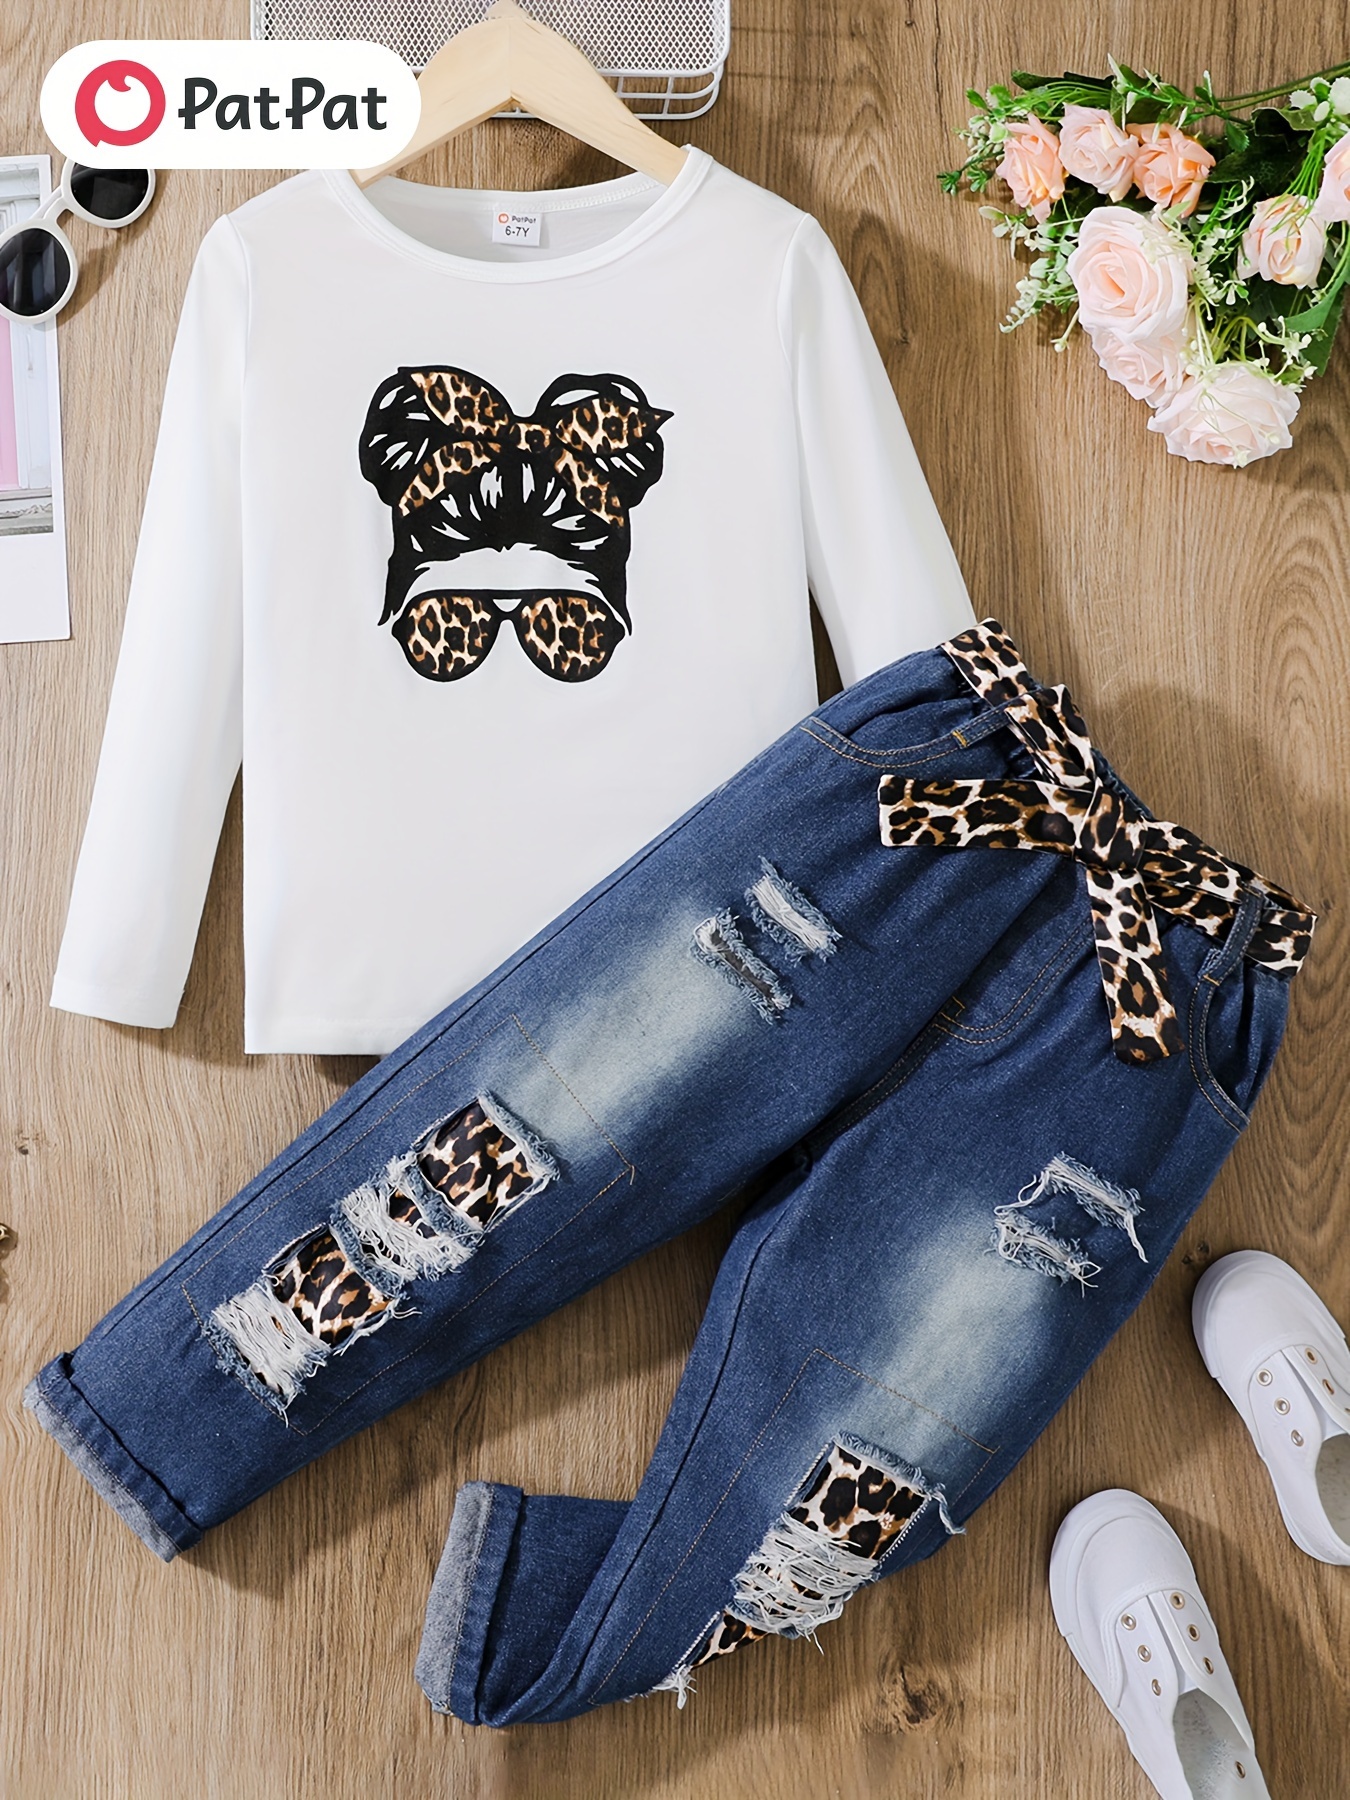 Patpat Girls Casual Trendy Cute Leopard Girl Graphic Long Sleeve T-Shirt, Blouses, Tee & Ripped Leopard Faded Denim Jeans Set for Summer Holiday Party